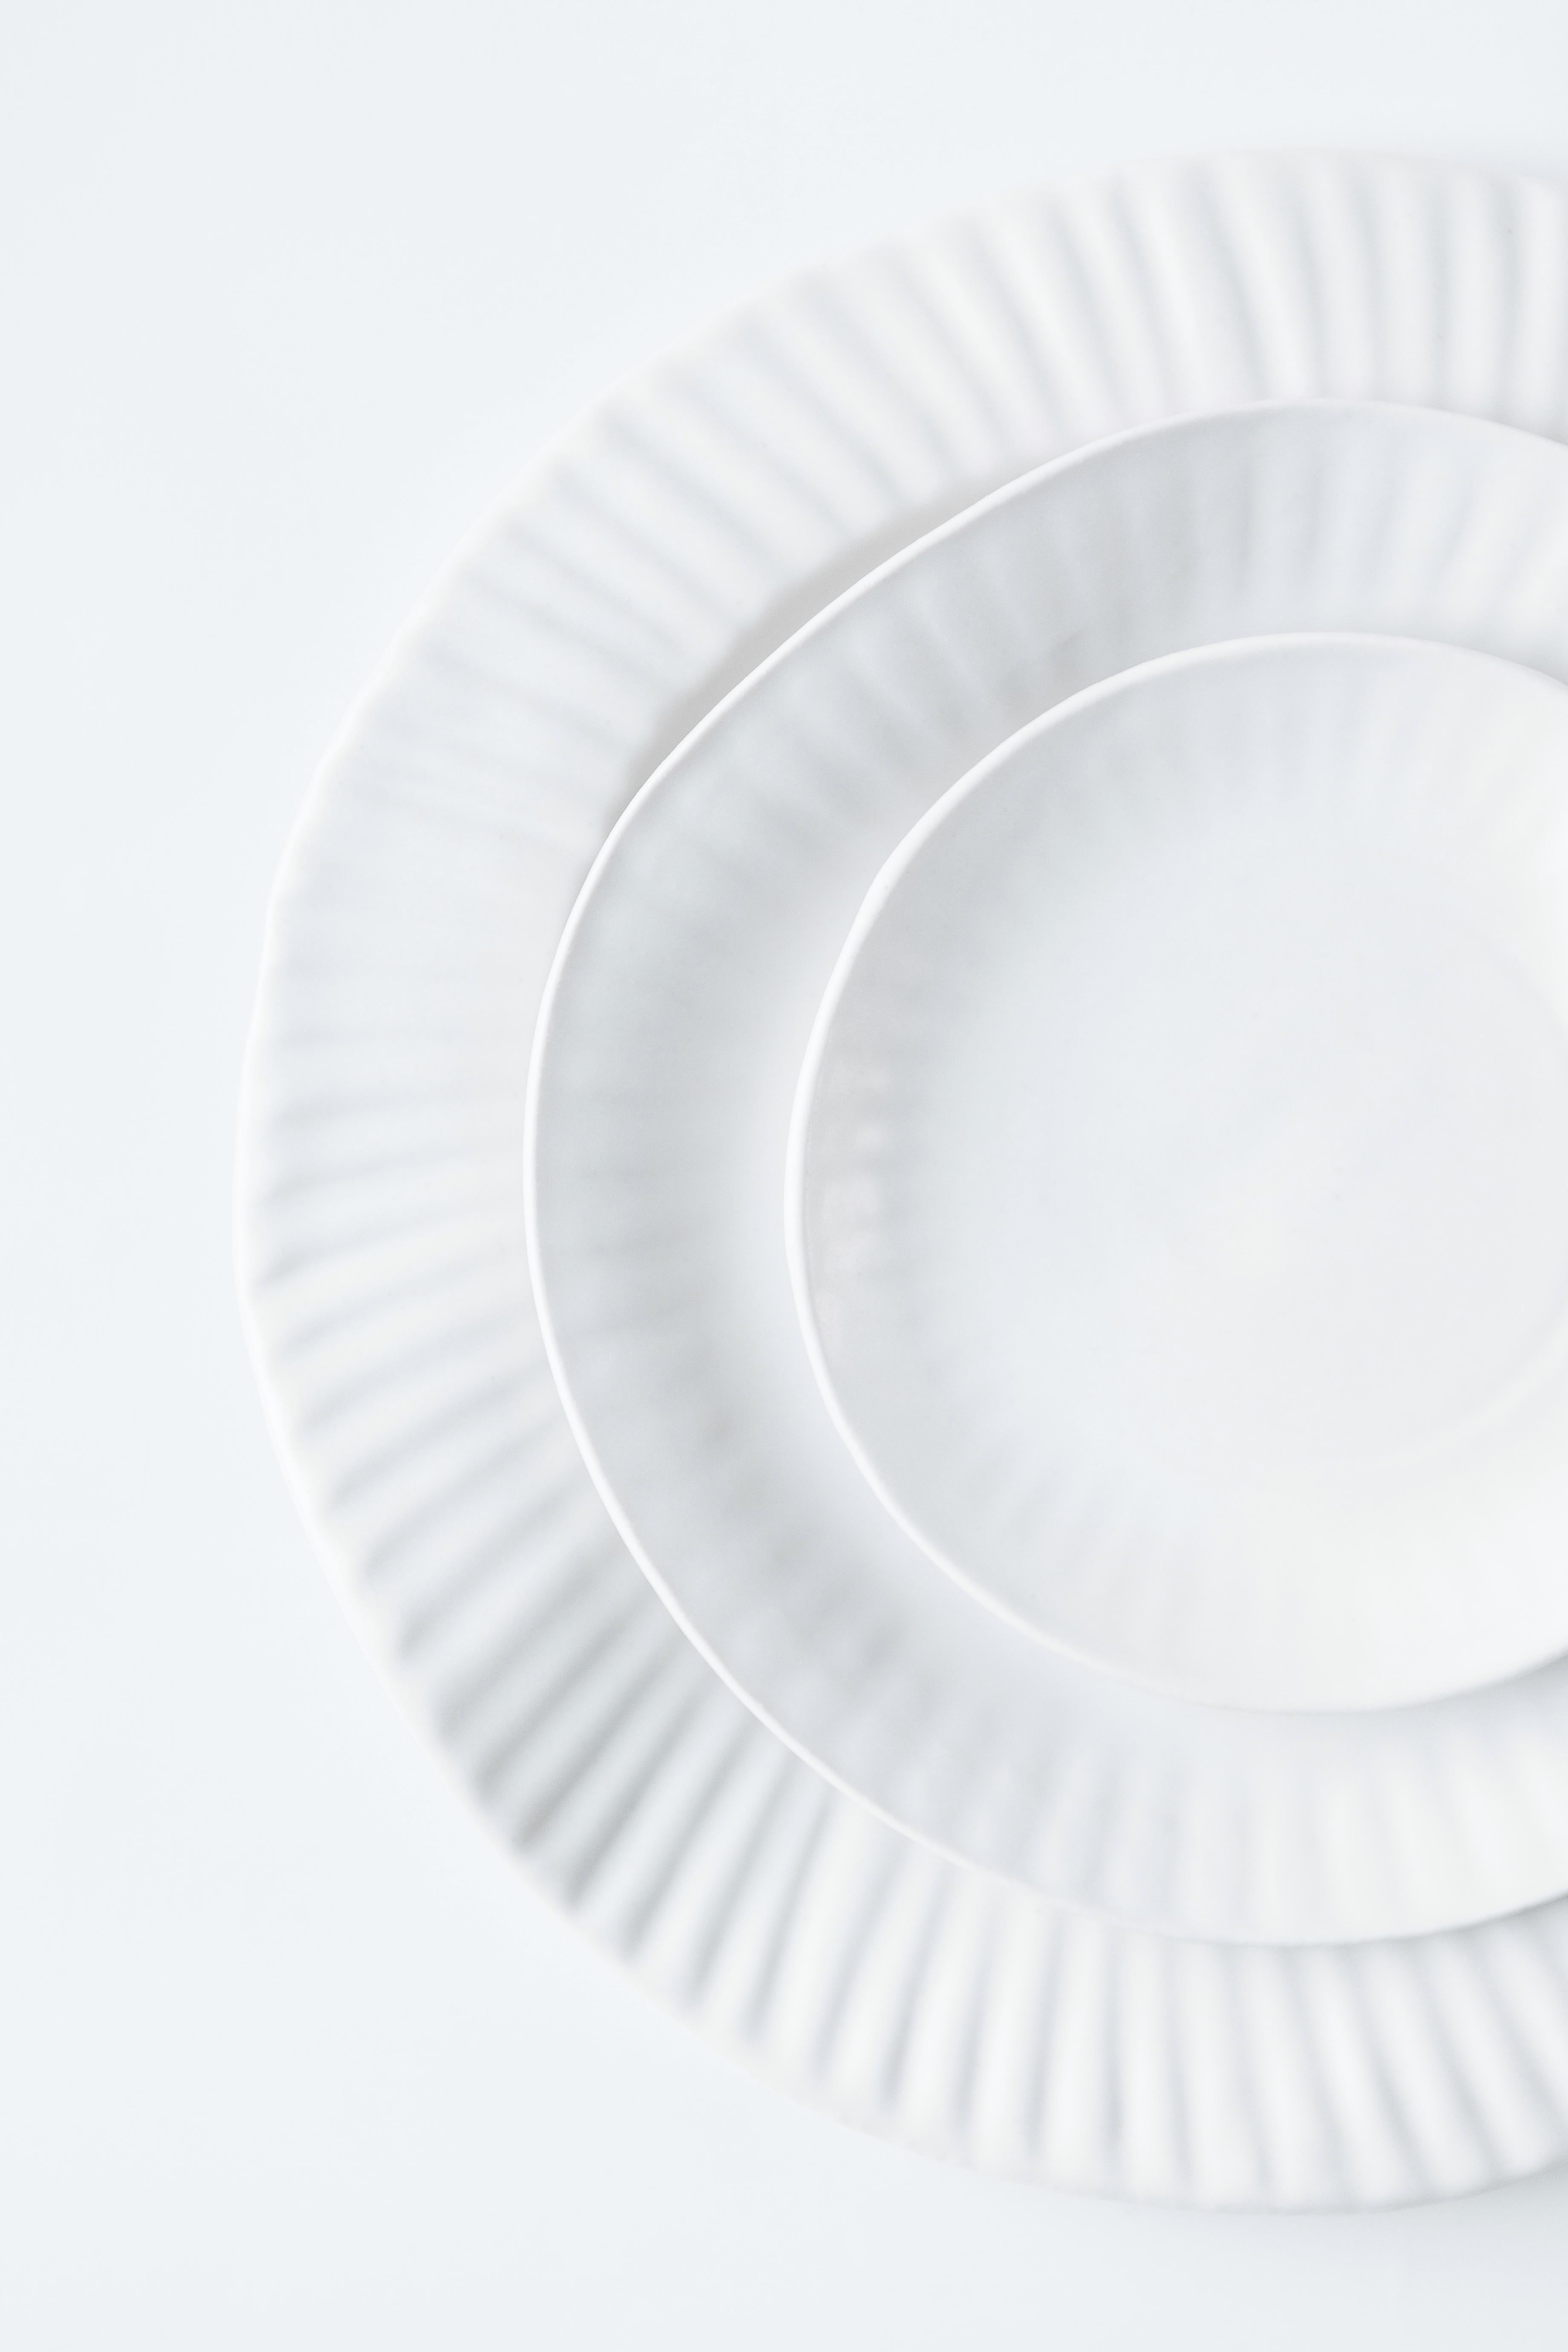 Modeled after the traditional paper variety that has been bent under the weight of barbeques, potlucks and picnic favorites for years, our porcelain paper plate leaves you with a taste of nostalgia. Our set of 18 comes with 6 large, 6 small and 6